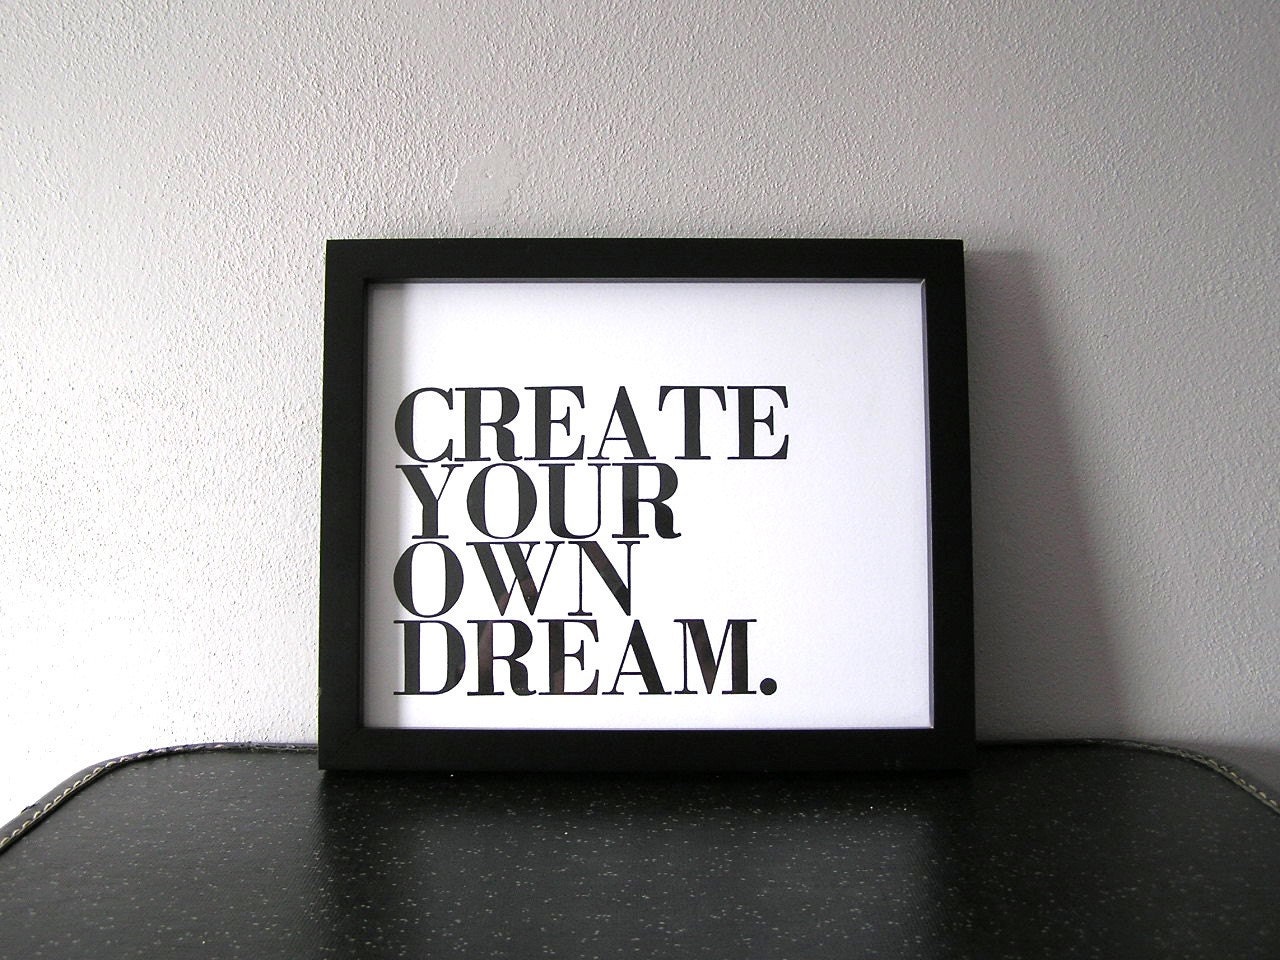 Motivational Art, Black and White Poster, Create Your Own Dream Letterpress Print, Inspirational Message, Simple Minimalist Style